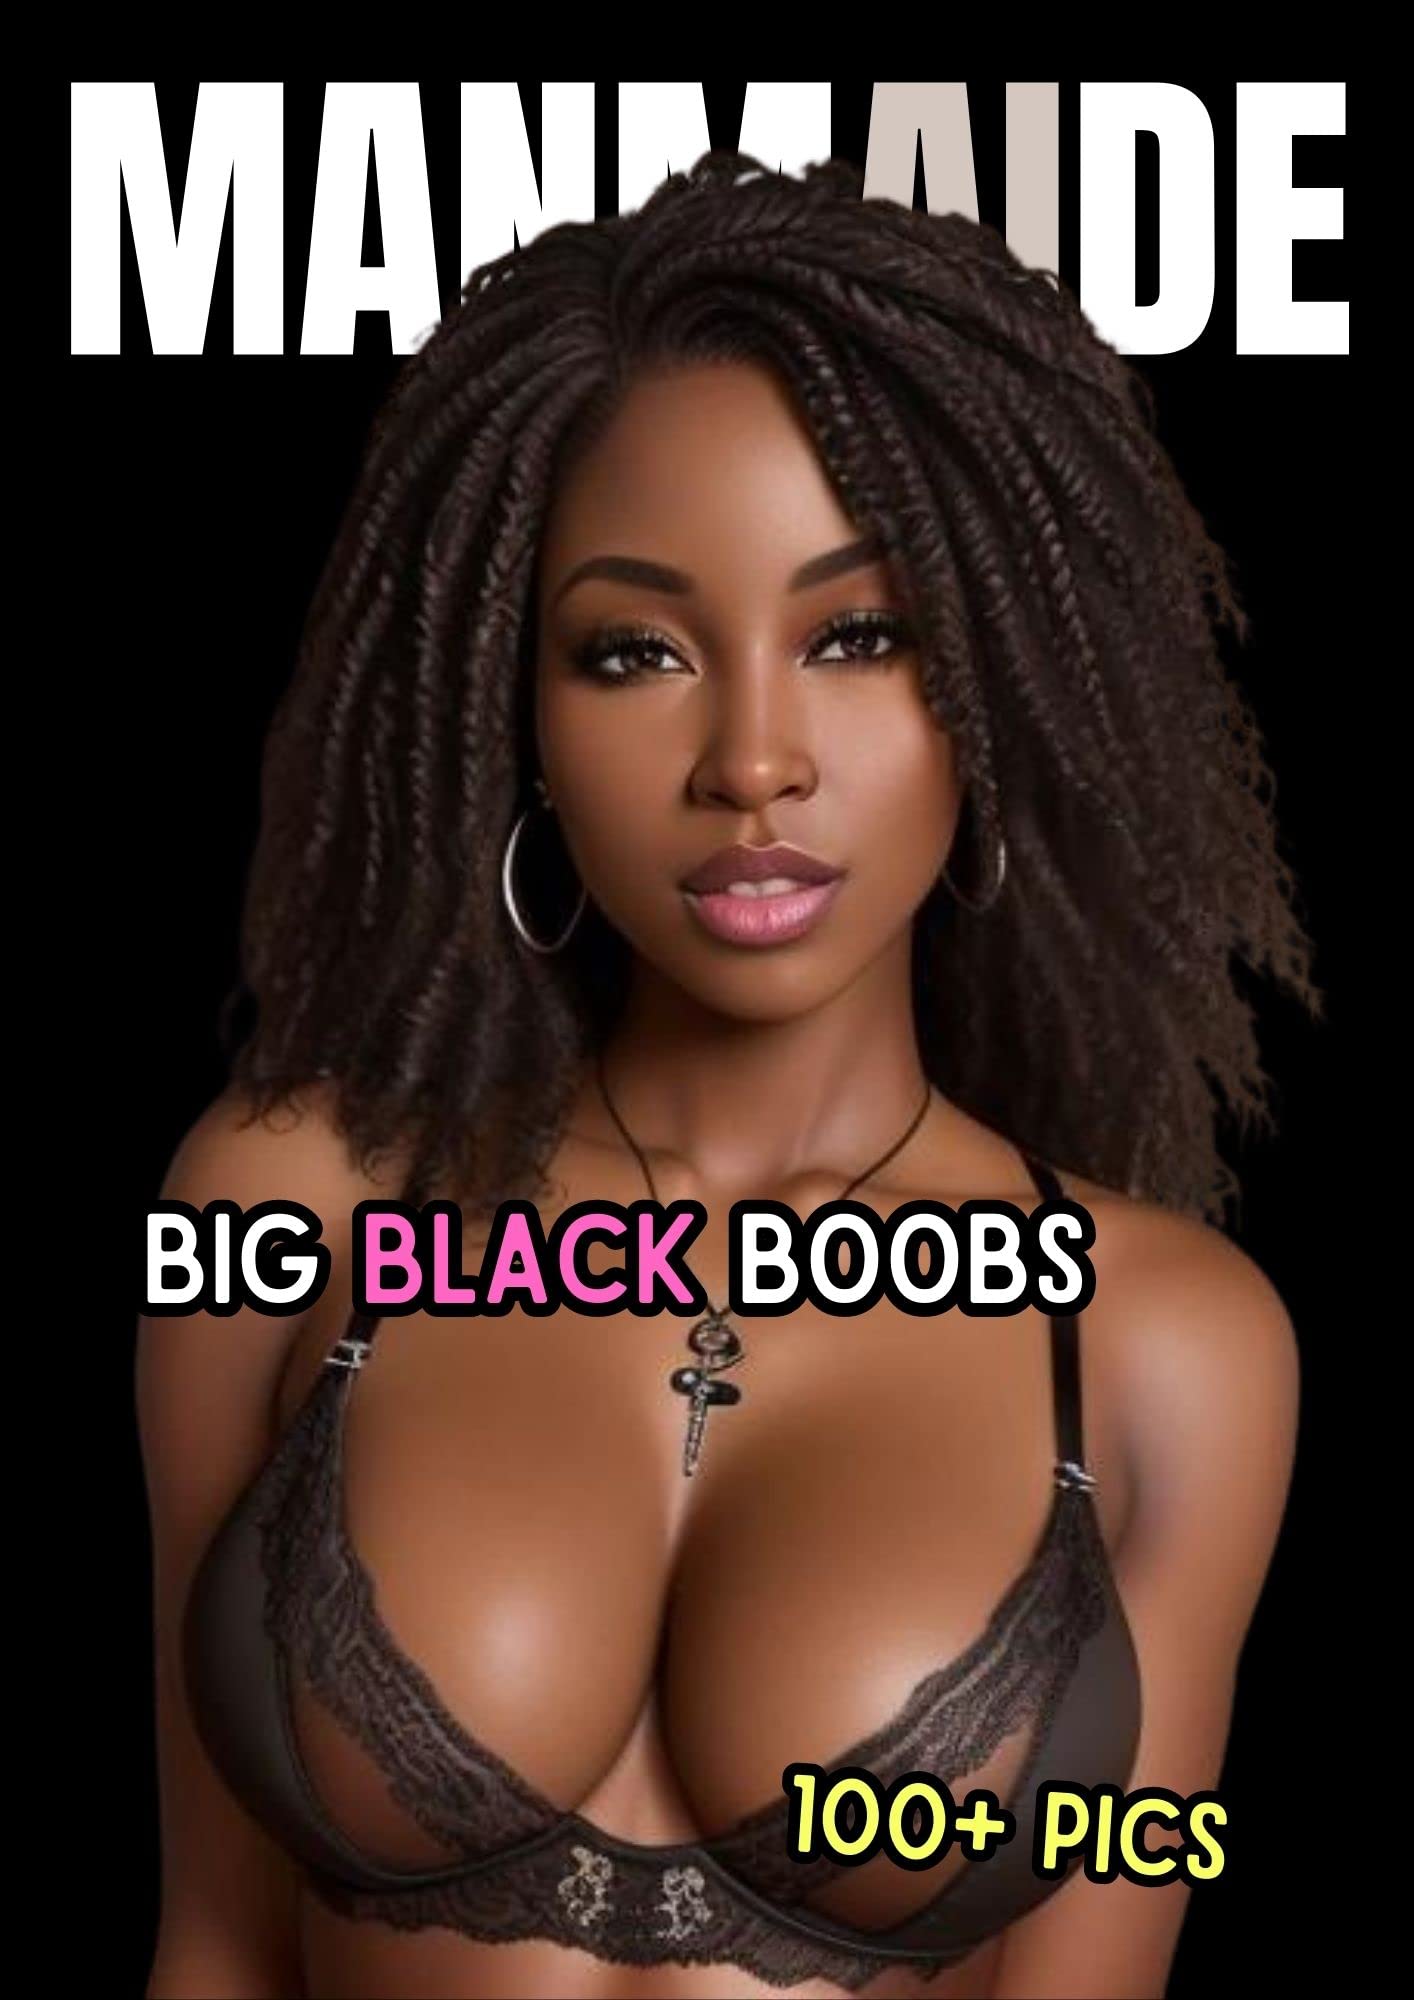 ct phillips recommends sexy big black boobs pic